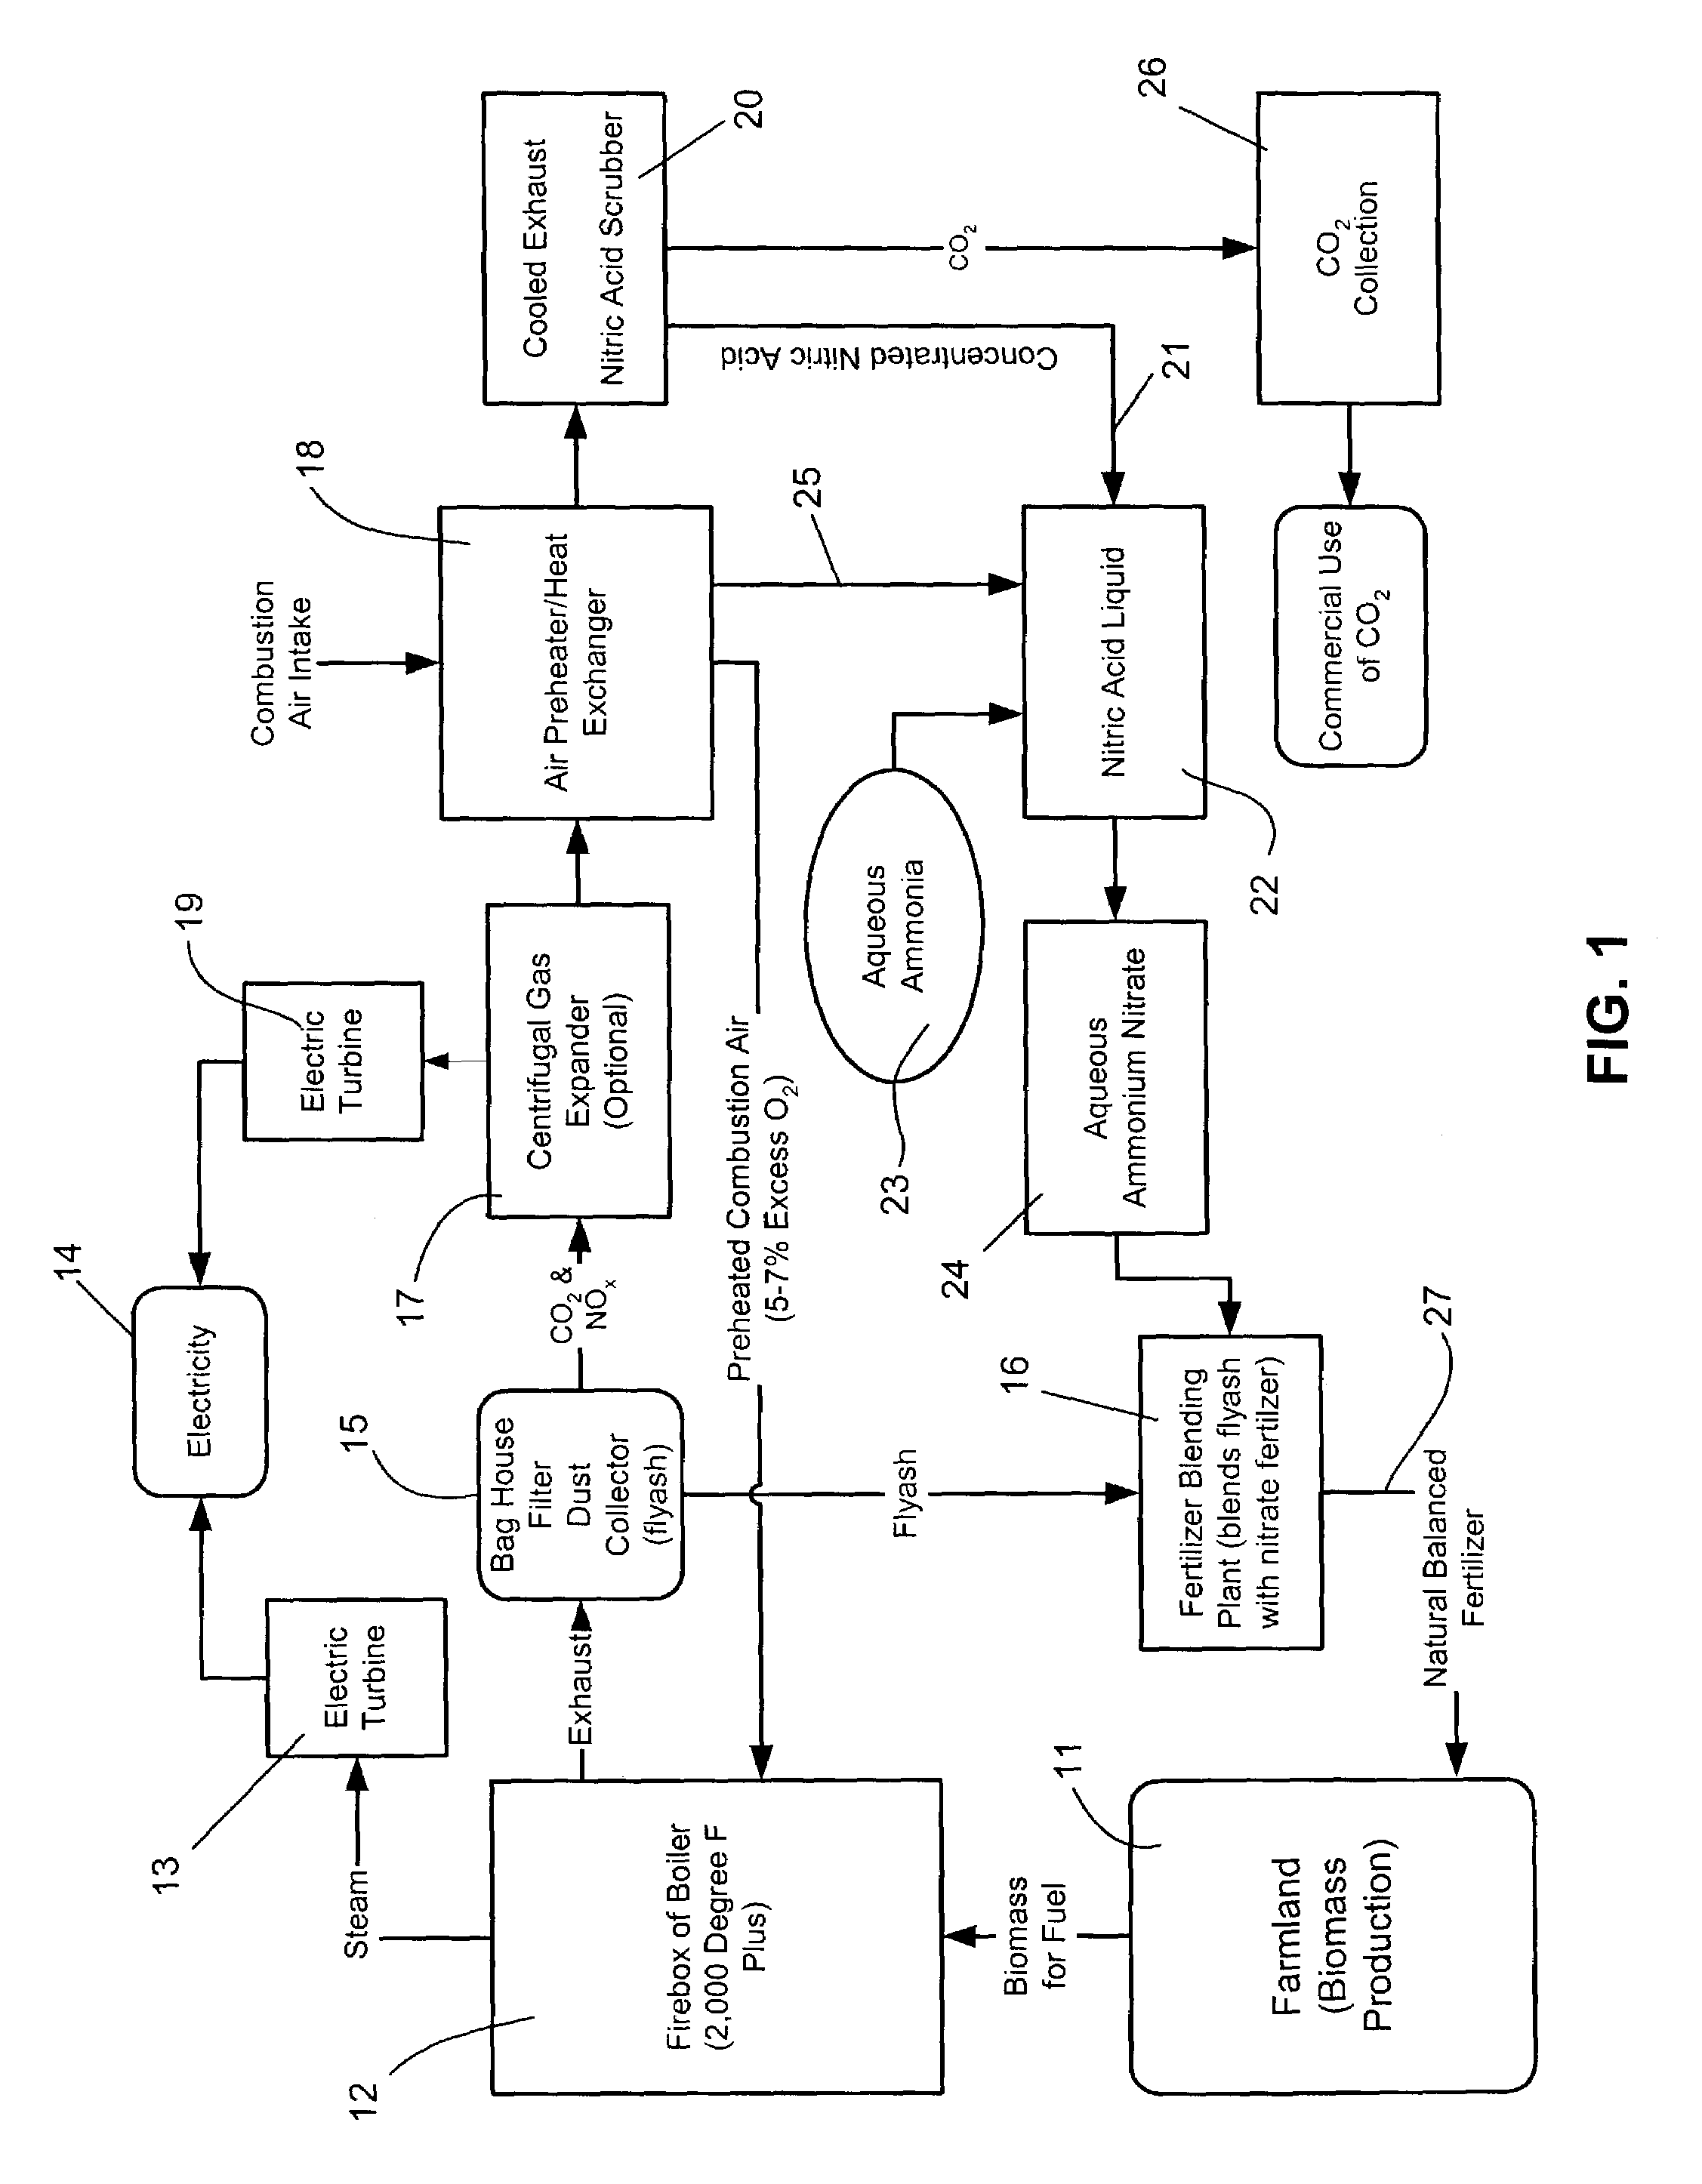 Process and apparatus for generating power, producing fertilizer, and sequestering, carbon dioxide using renewable biomass